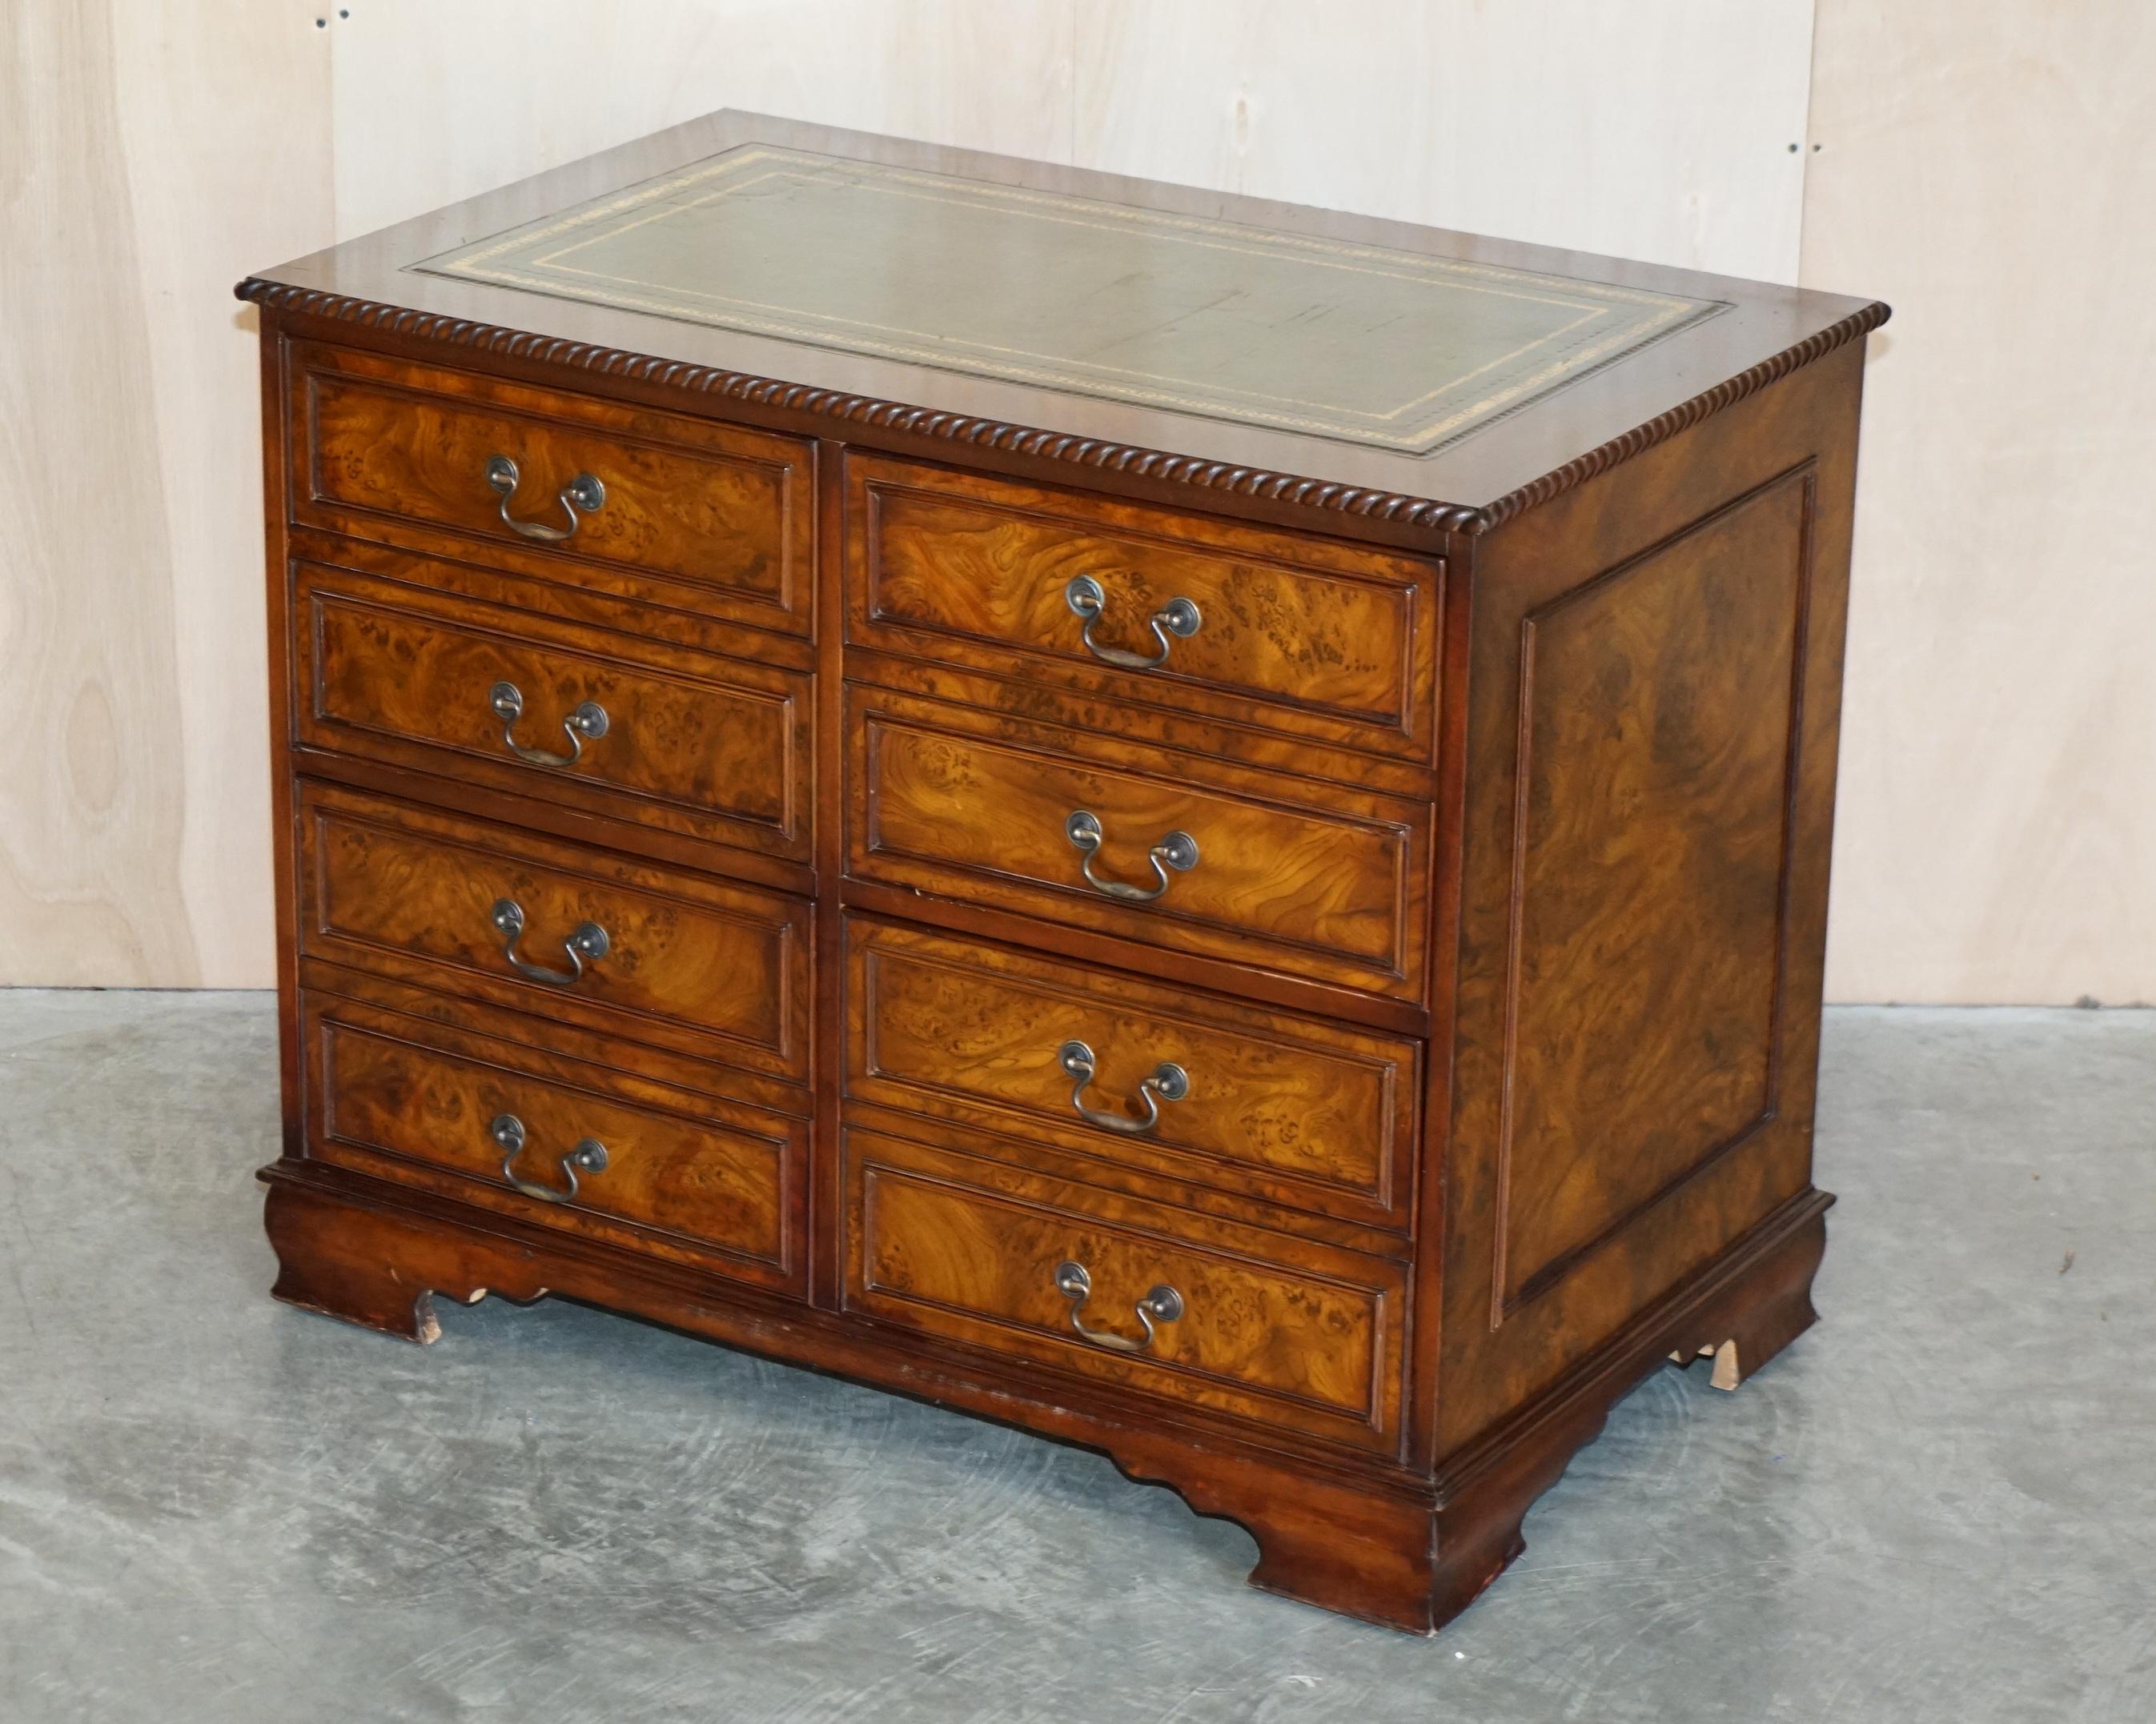 We are delighted to offer for sale this lovely, very well made Burr Elm quad bank filing cabinet with gold leaf embossed green leather writing surface which is part of a suite.

As mentioned this is part of a suite, I have in total the large